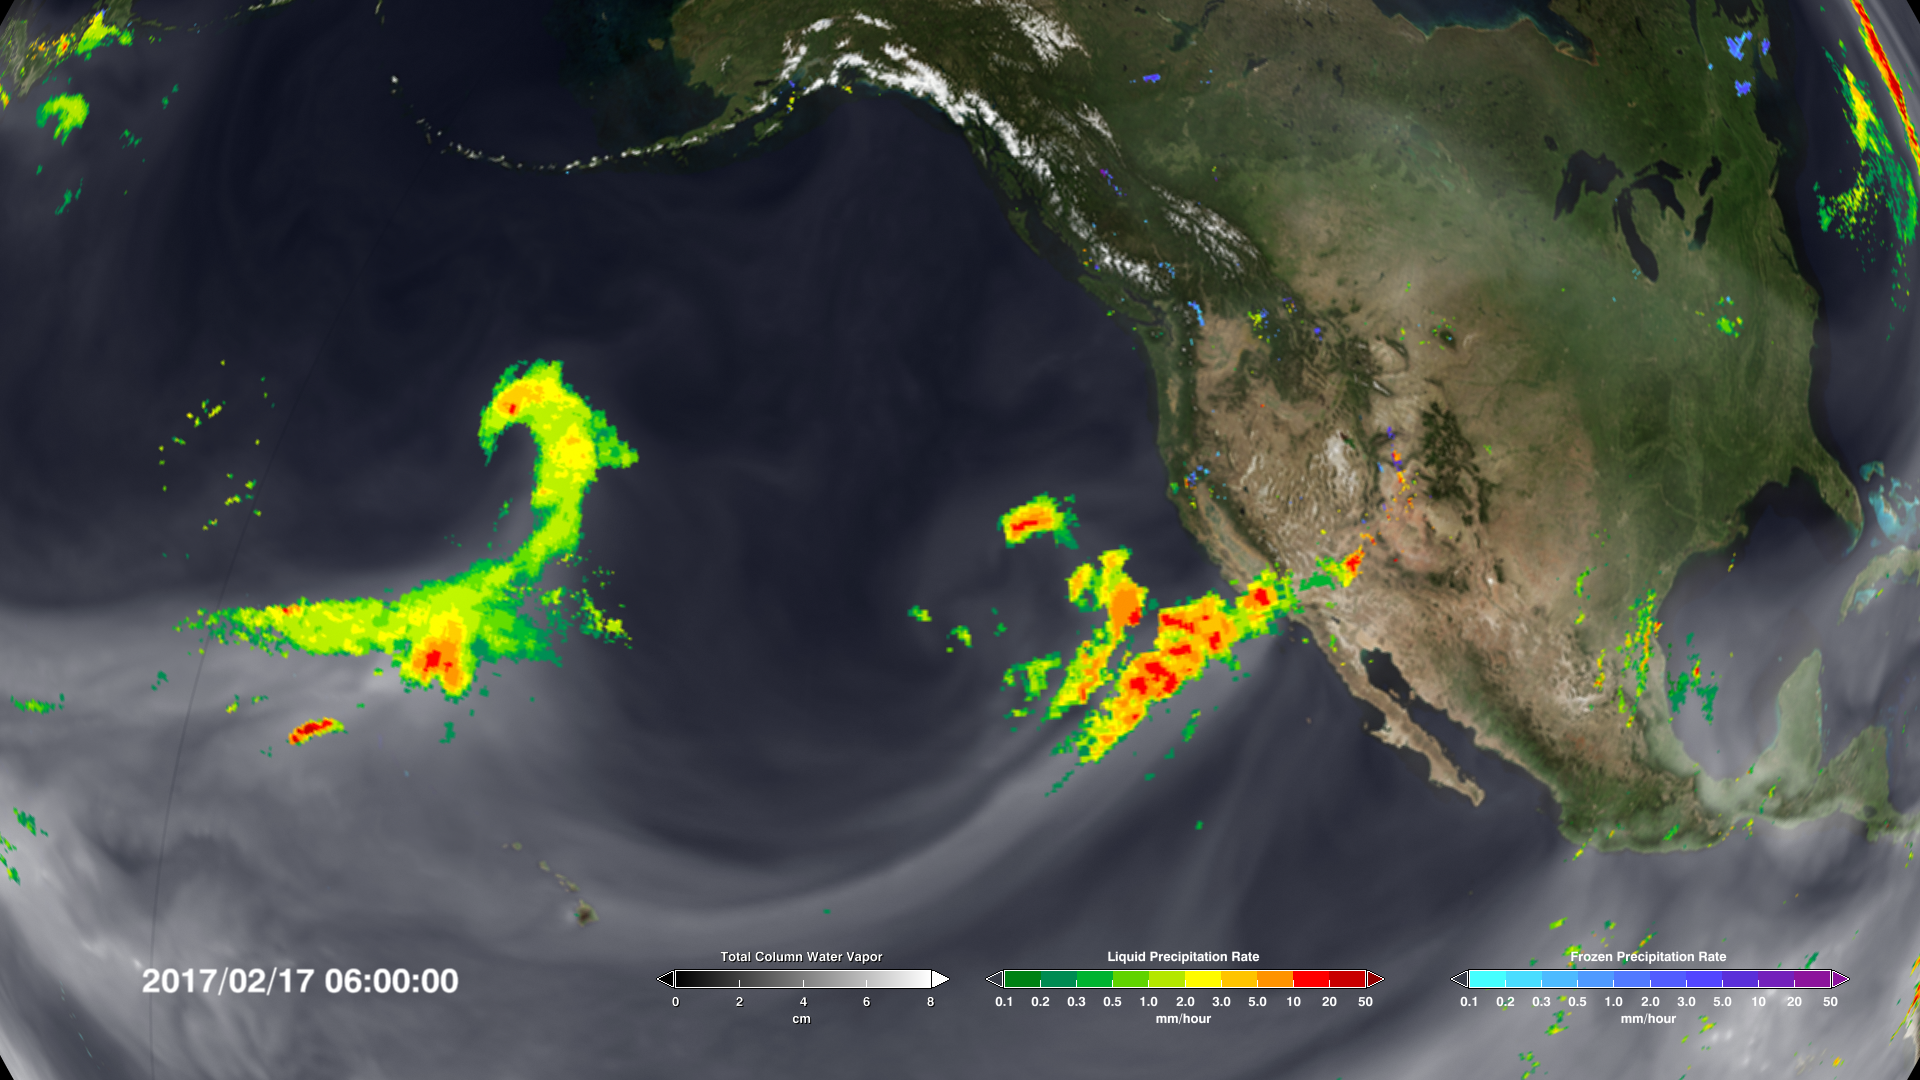 After four years of drought, atmospheric rivers deliver rain to California.